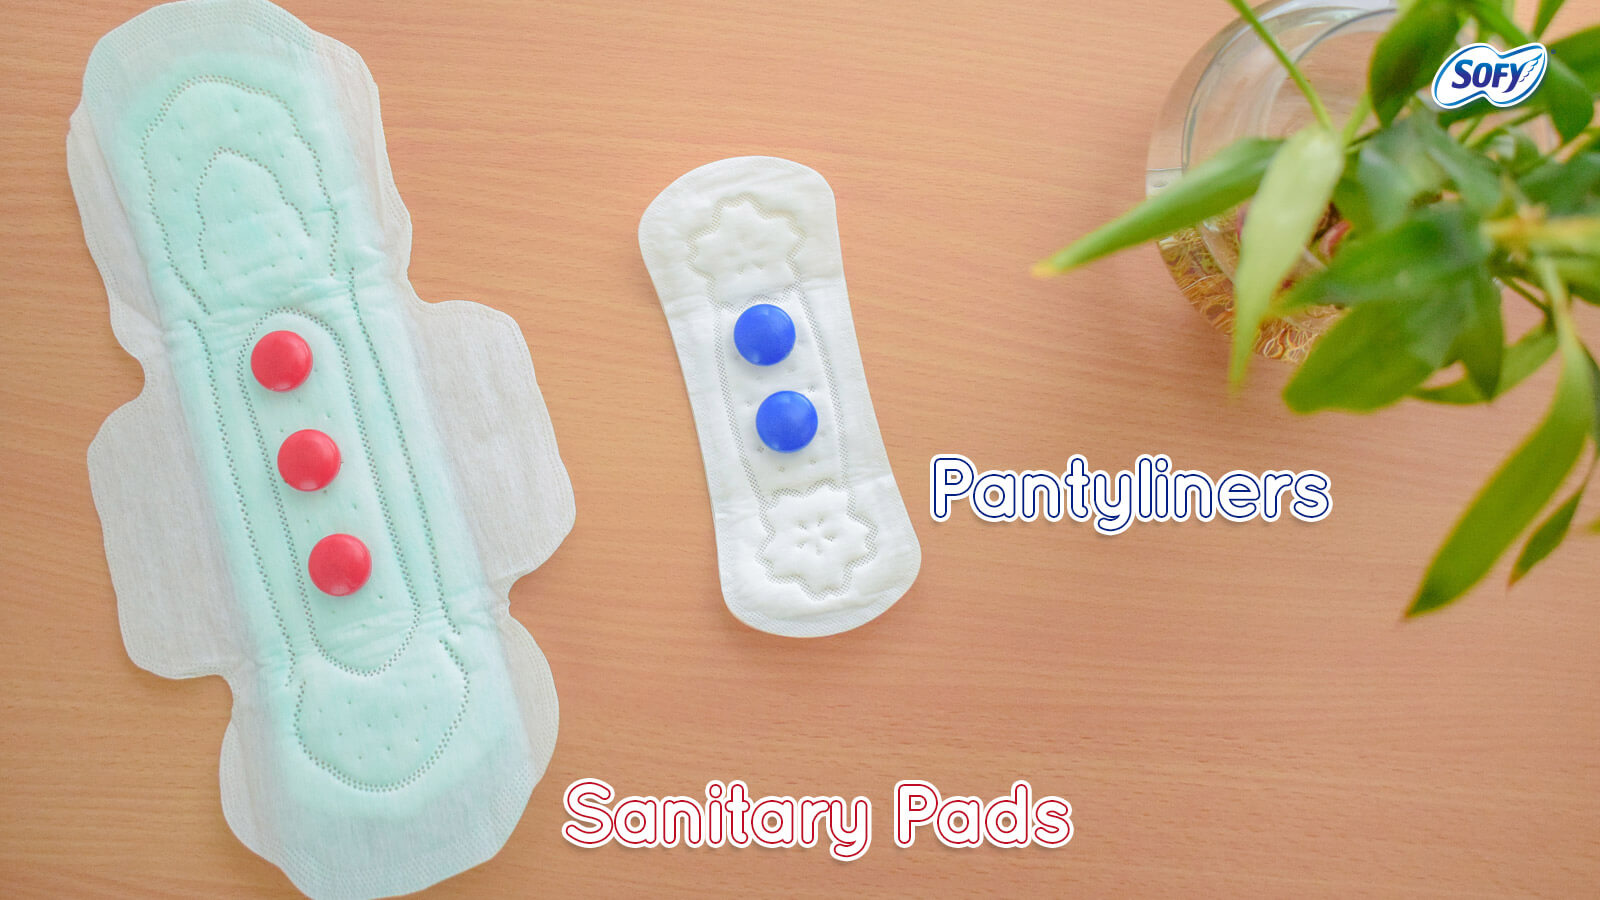 Pads & Pantyliners: How They Are Different!